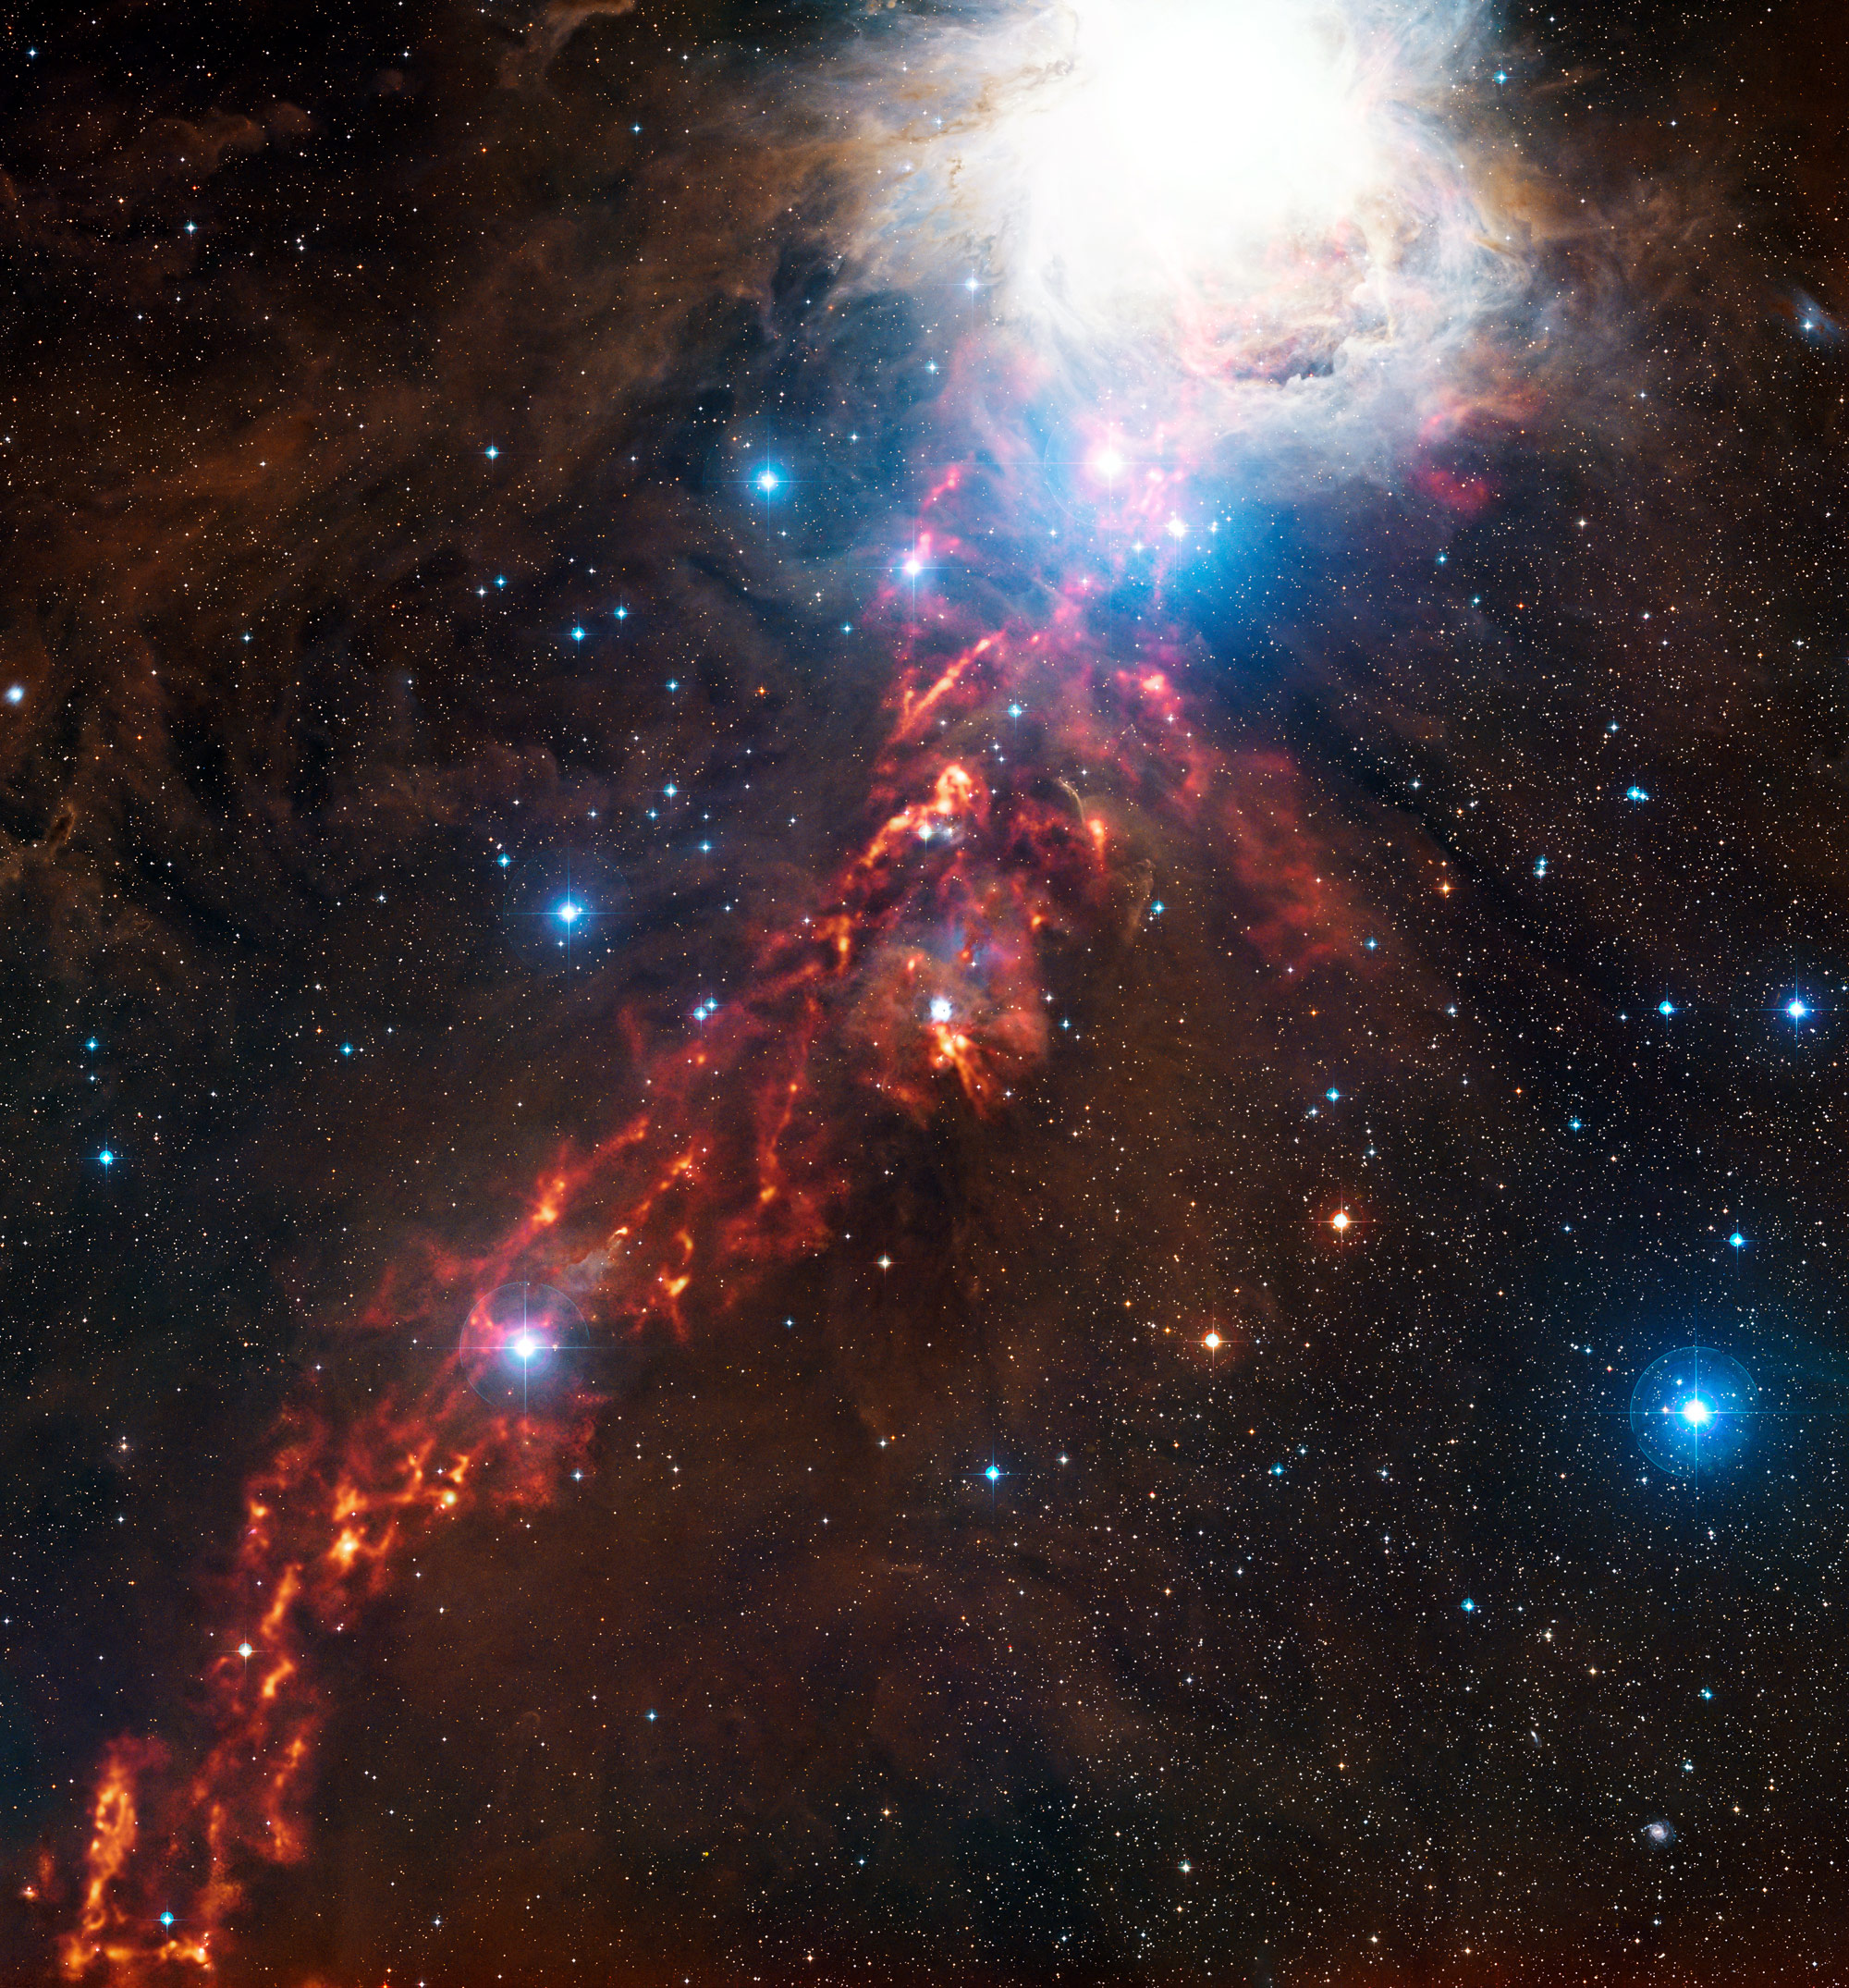 APEX Reveals Interstellar Dust in the Cosmic Clouds of Orion